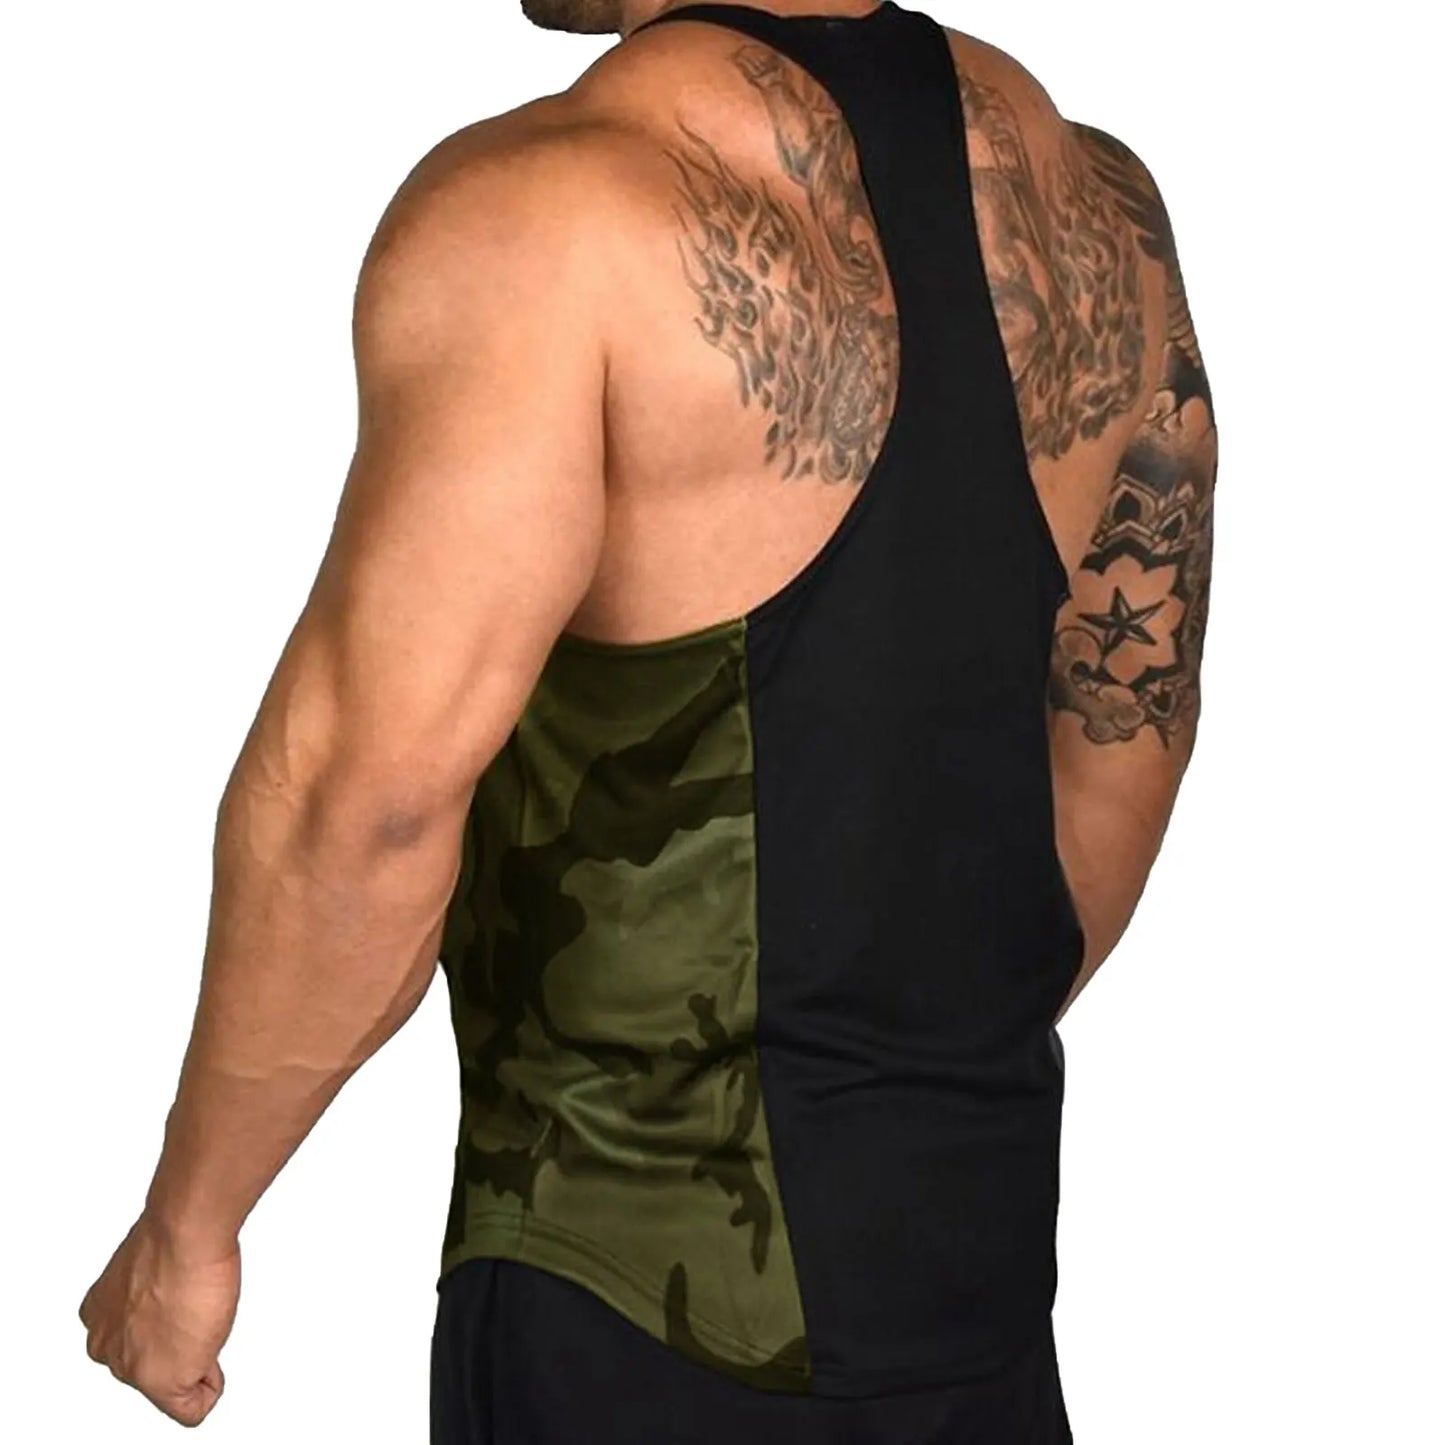 Gym Mens Bodybuilding Camo Sleeveless Single Tank Top Muscle Stringer Athletic Fitness Vest Tops Summer Clothes